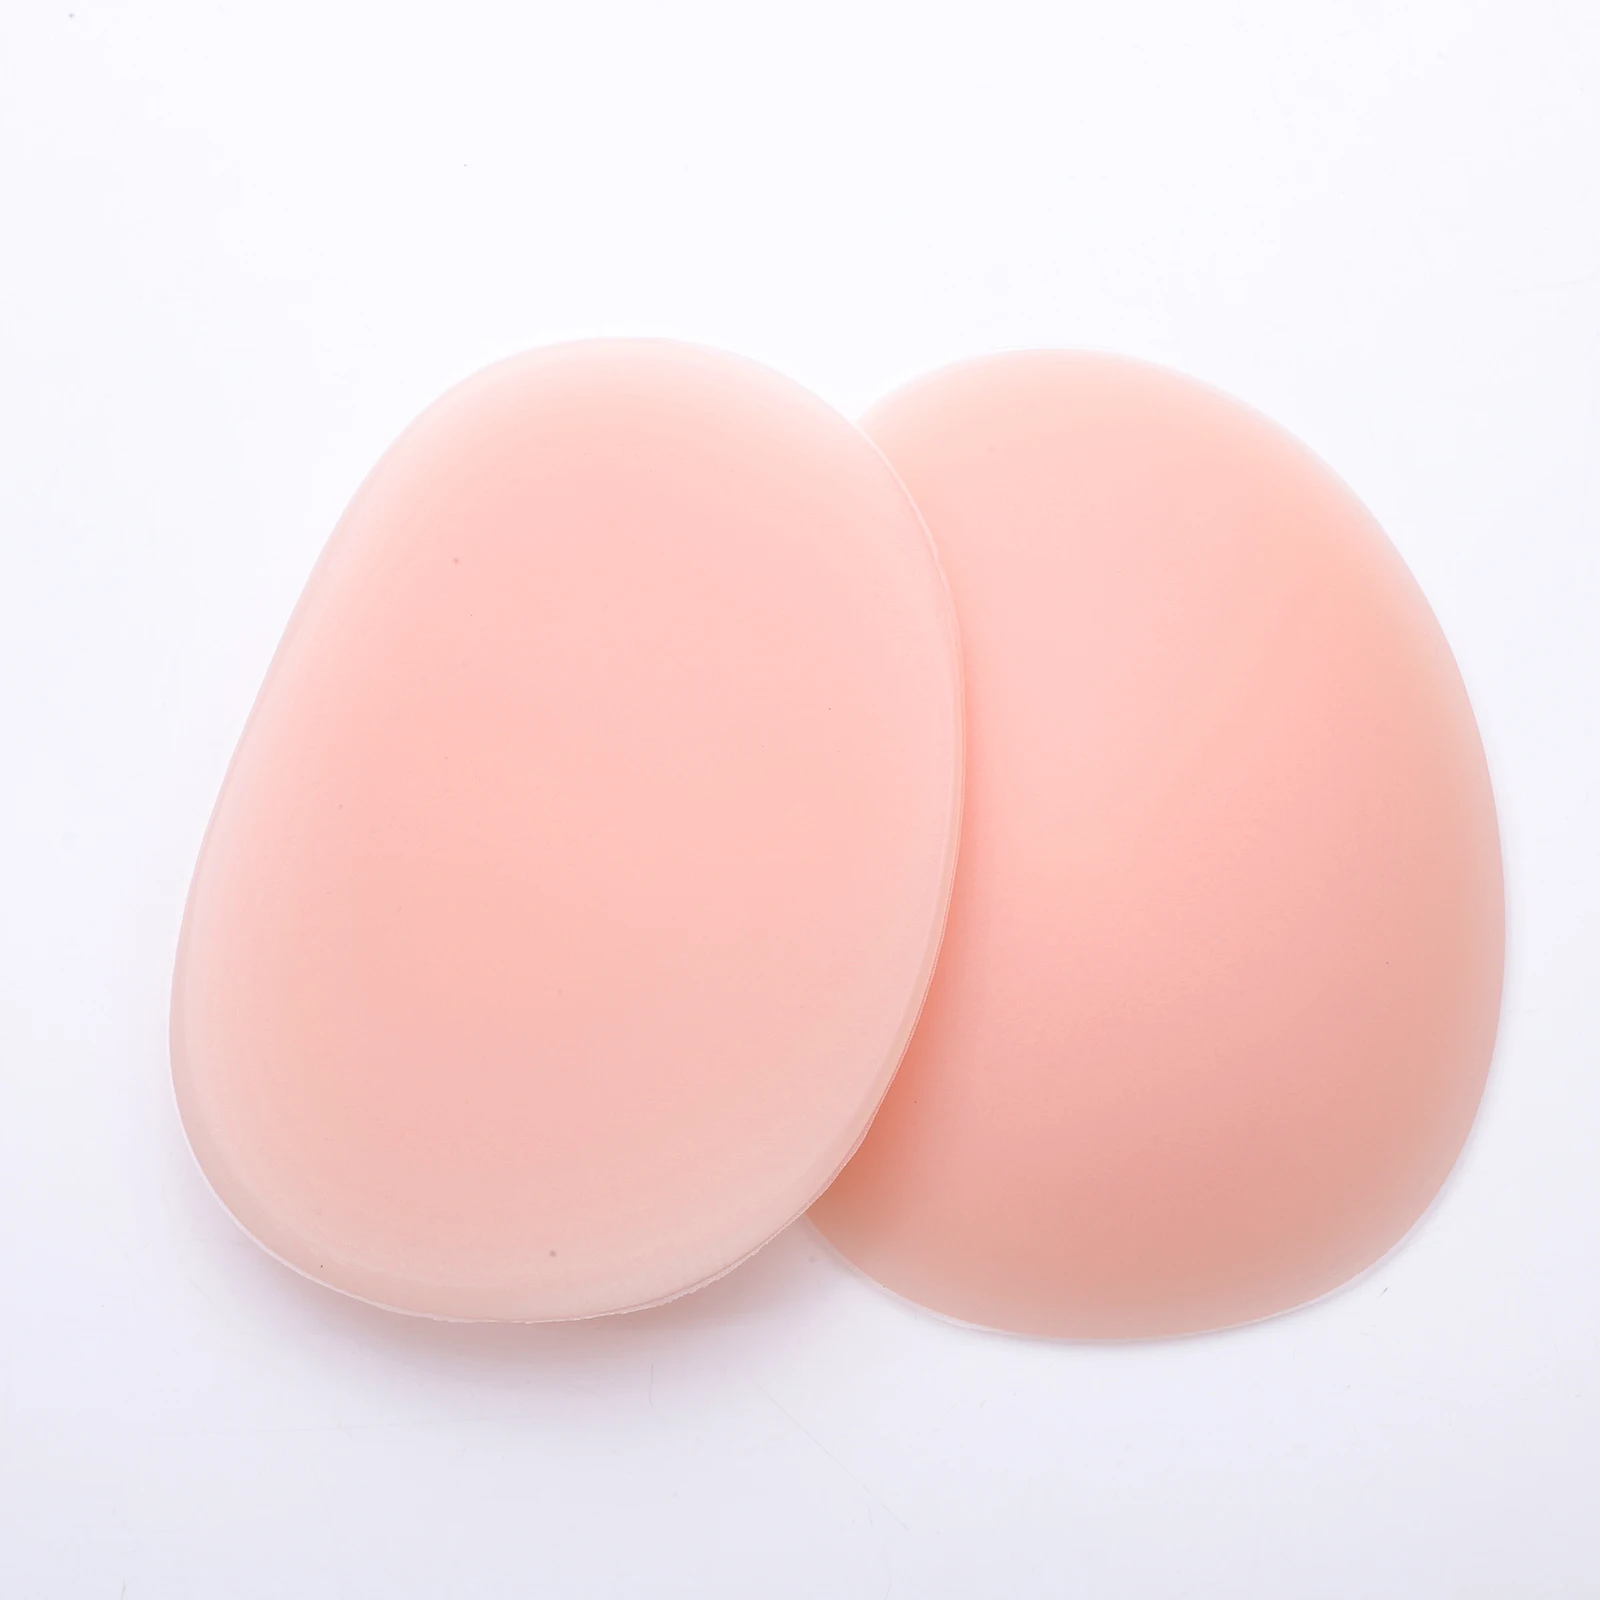 1 Pair Thin/Thick Buttocks Enhancers Inserts Silicone Butt Lifter Pads Oval Body Shaper Non-Adhesive Removable Hip Up Pads